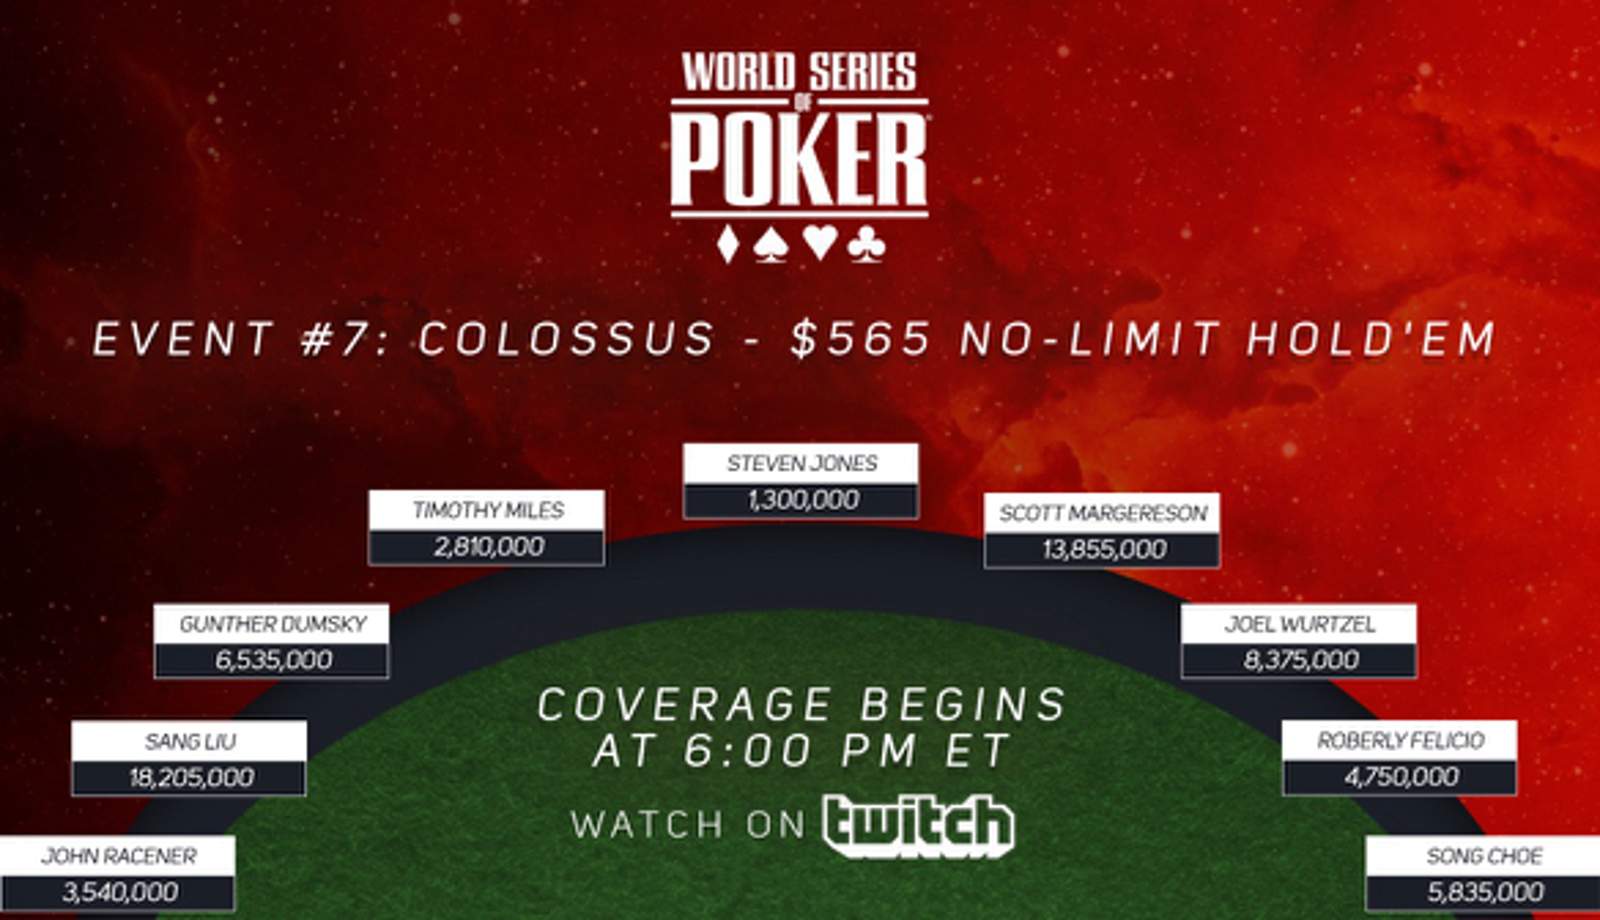 COLOSSUS Final Table Live on Twitch